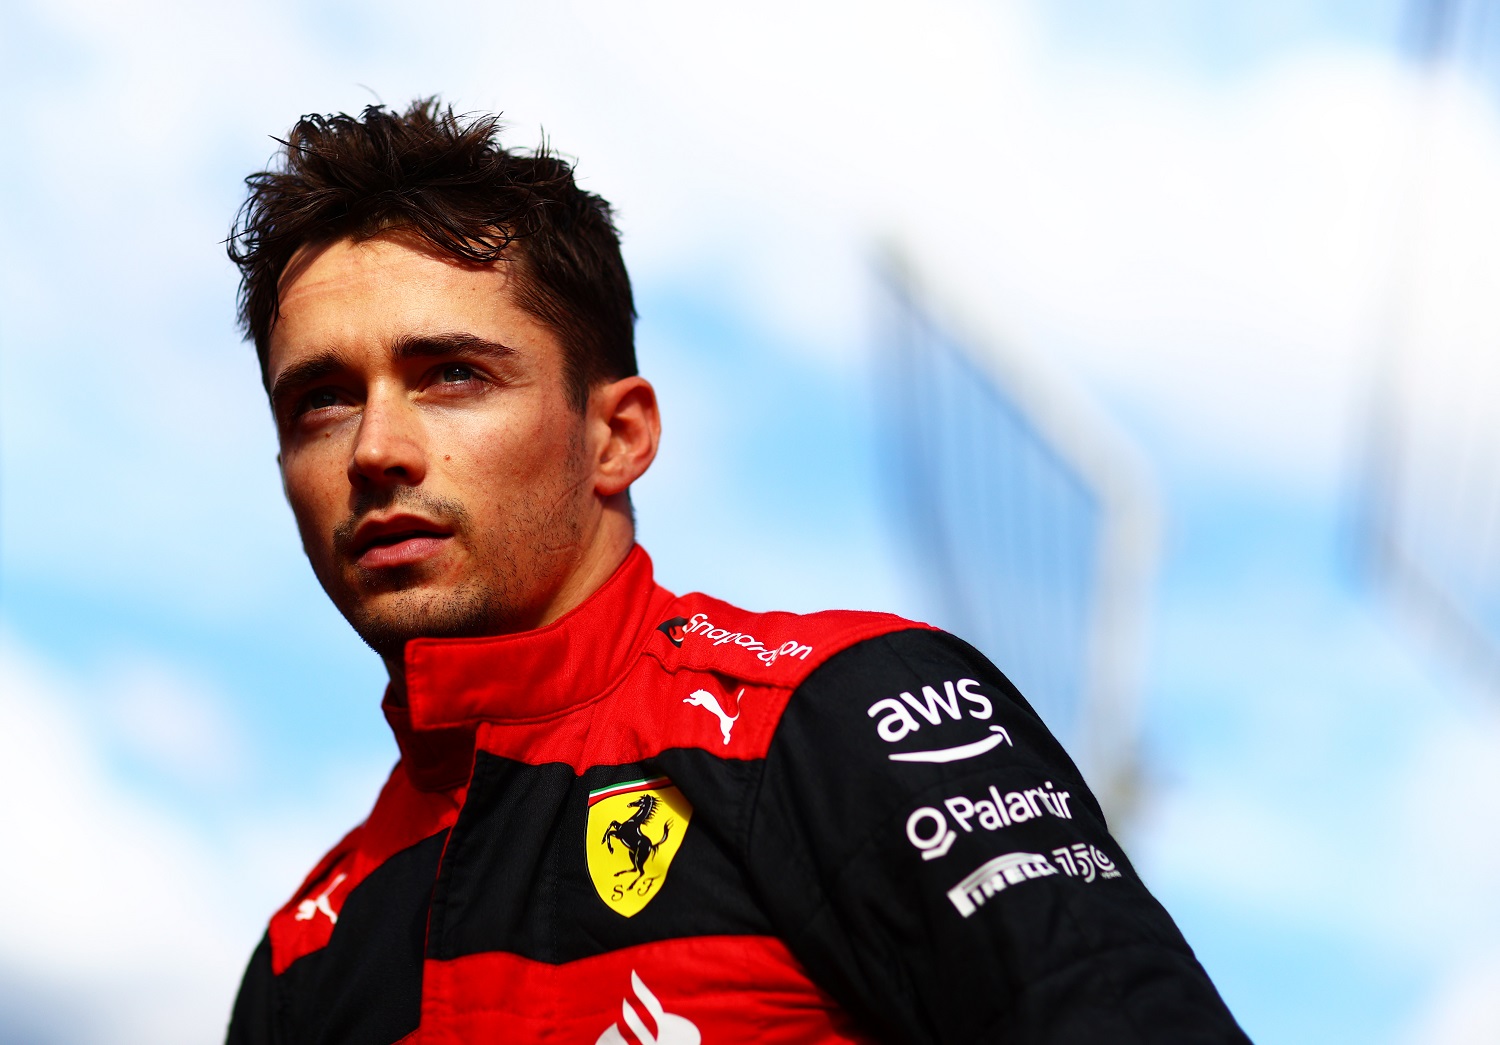 Charles Leclerc of Monaco and Ferrari prepares to drive on the grid during the Formula 1 Grand Prix of Australia at Melbourne Grand Prix Circuit on April 10, 2022.